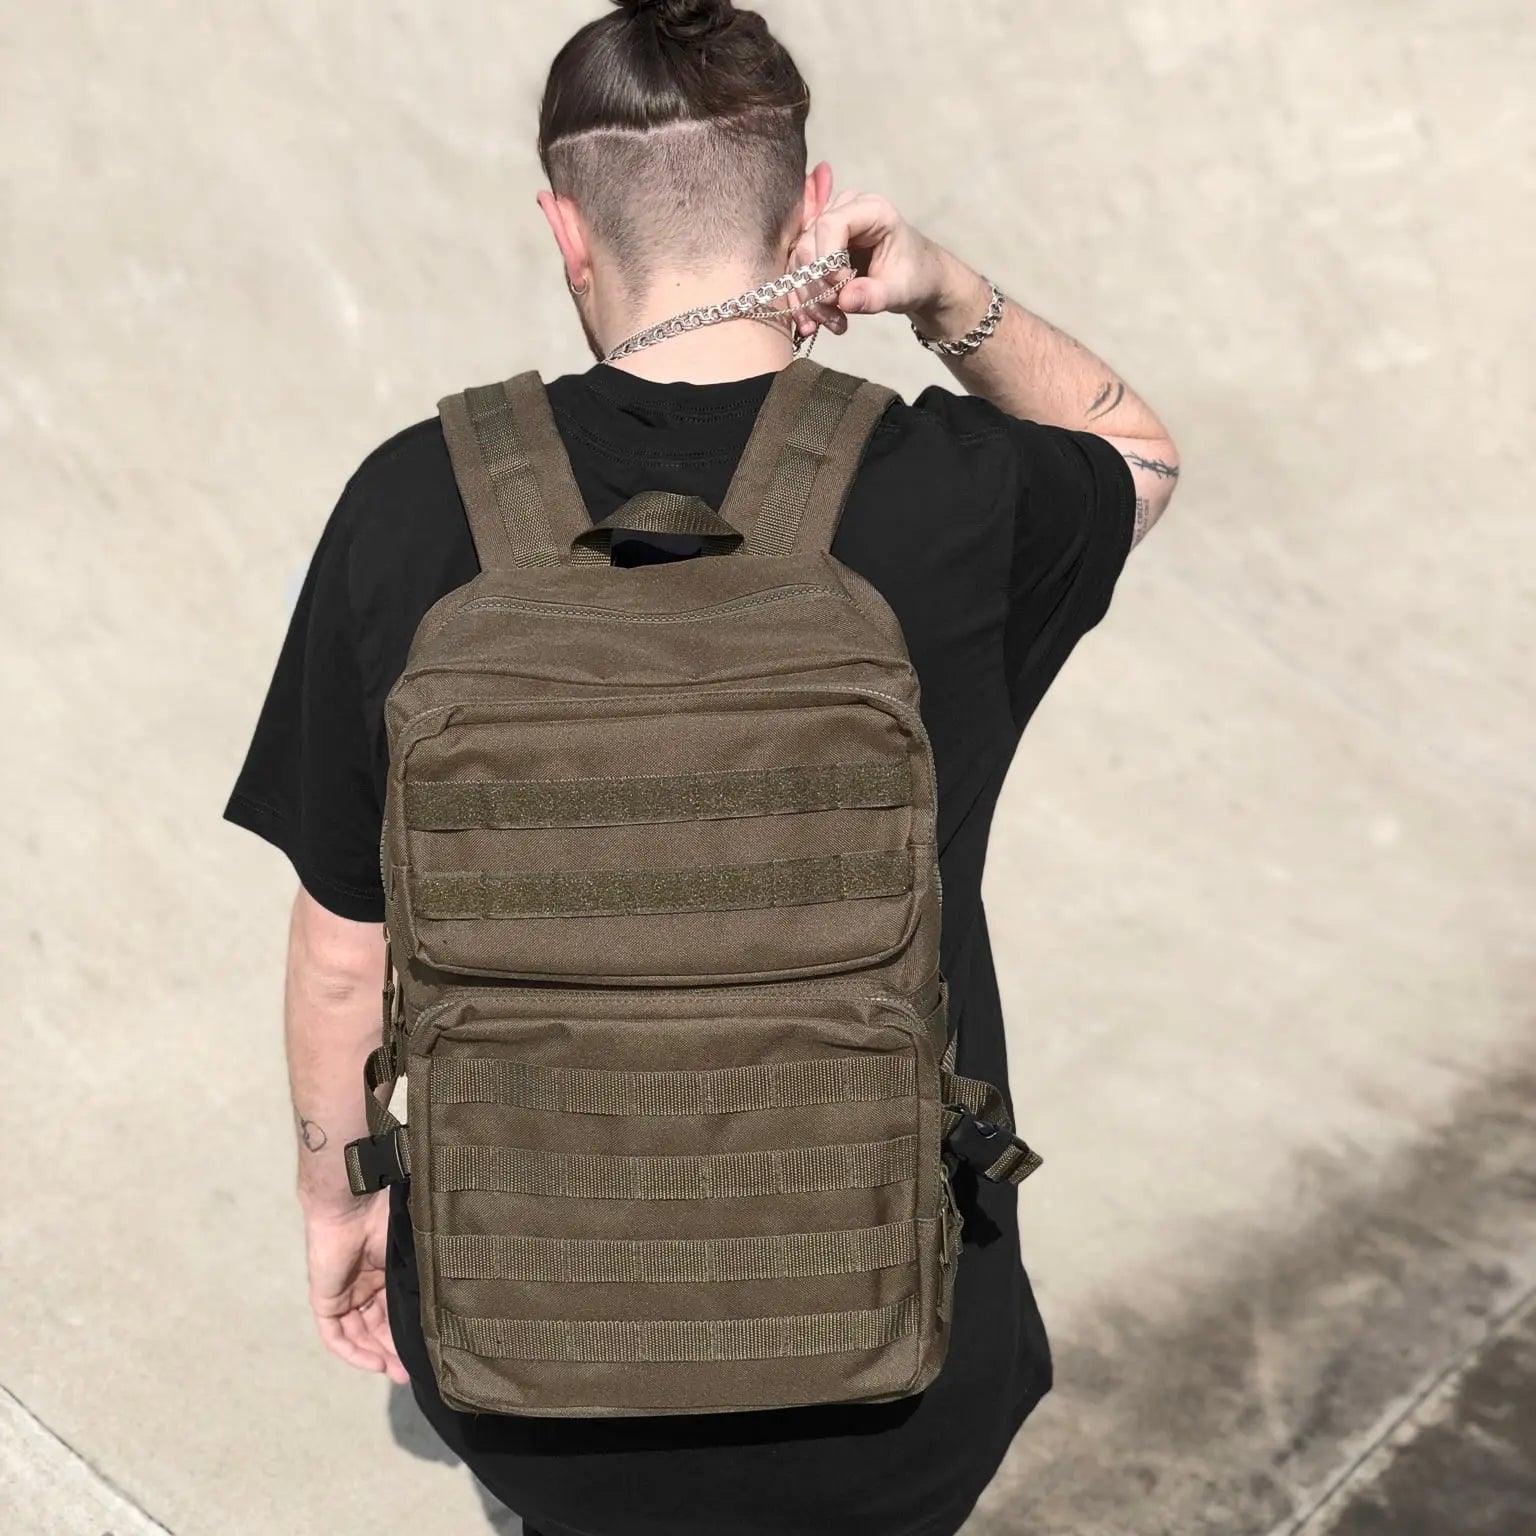 Model wearing the Tactical Bag in military green